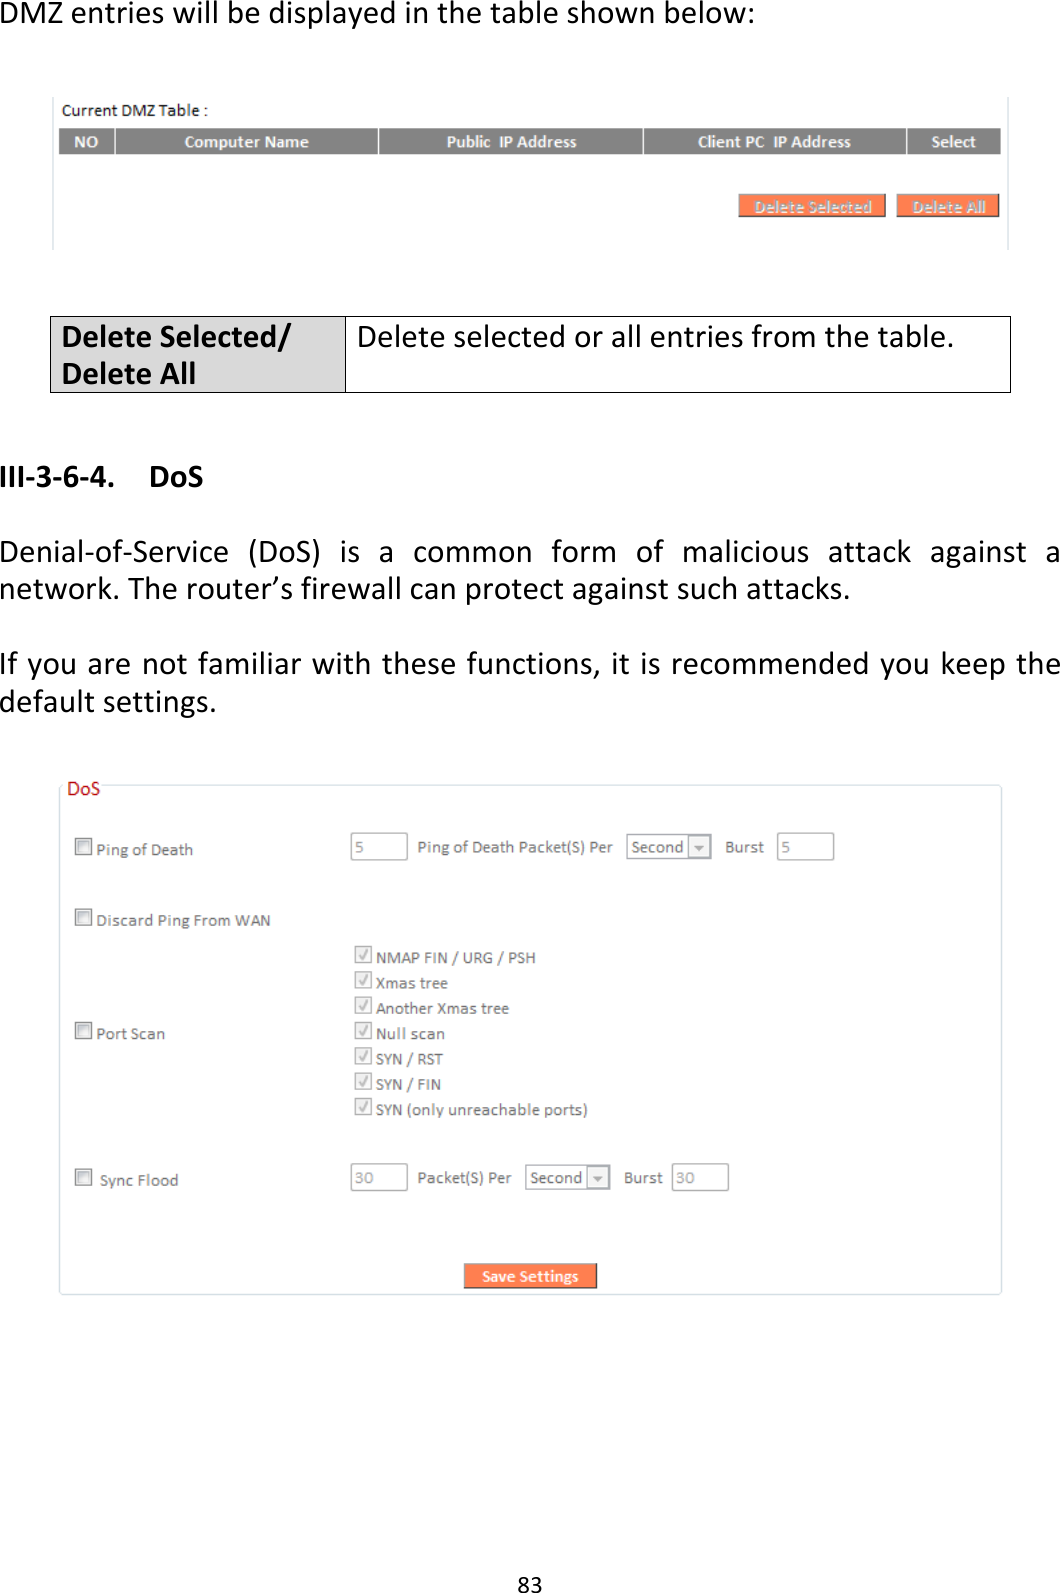 83 DMZ entries will be displayed in the table shown below:    Delete Selected/ Delete All Delete selected or all entries from the table.  III-3-6-4.  DoS  Denial-of-Service  (DoS)  is  a  common  form  of  malicious  attack  against  a network. The router’s firewall can protect against such attacks.  If you are not familiar with these functions, it is recommended you keep the default settings.        